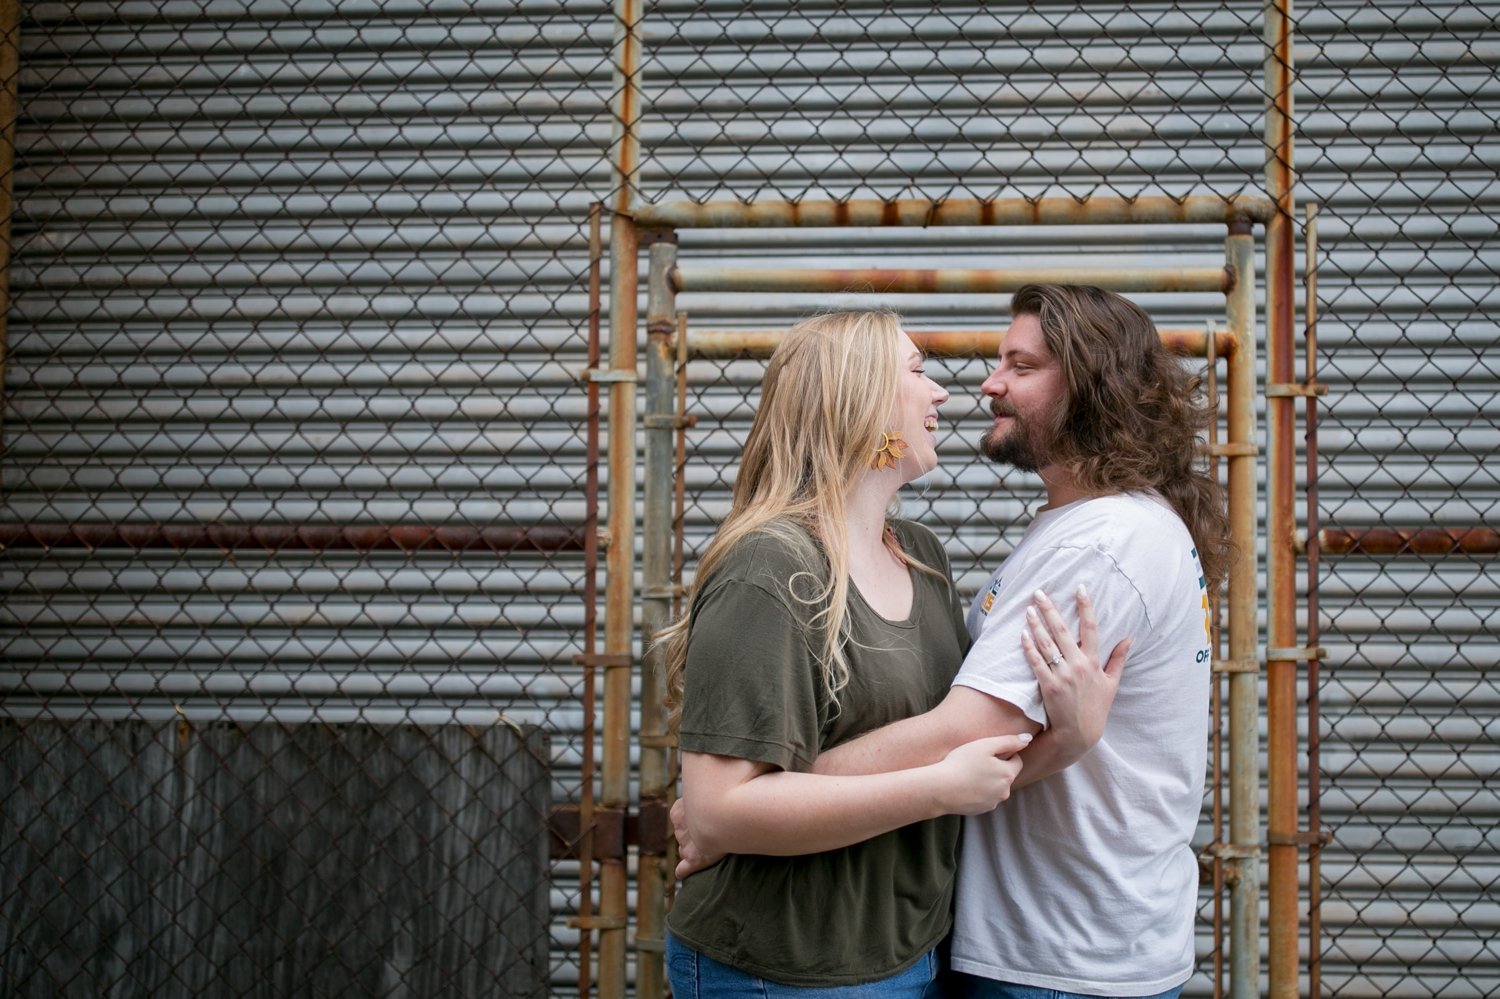 Downtown-Tampa-Heights-Engagement-Session-Caitlin-and-Sal 5.jpg